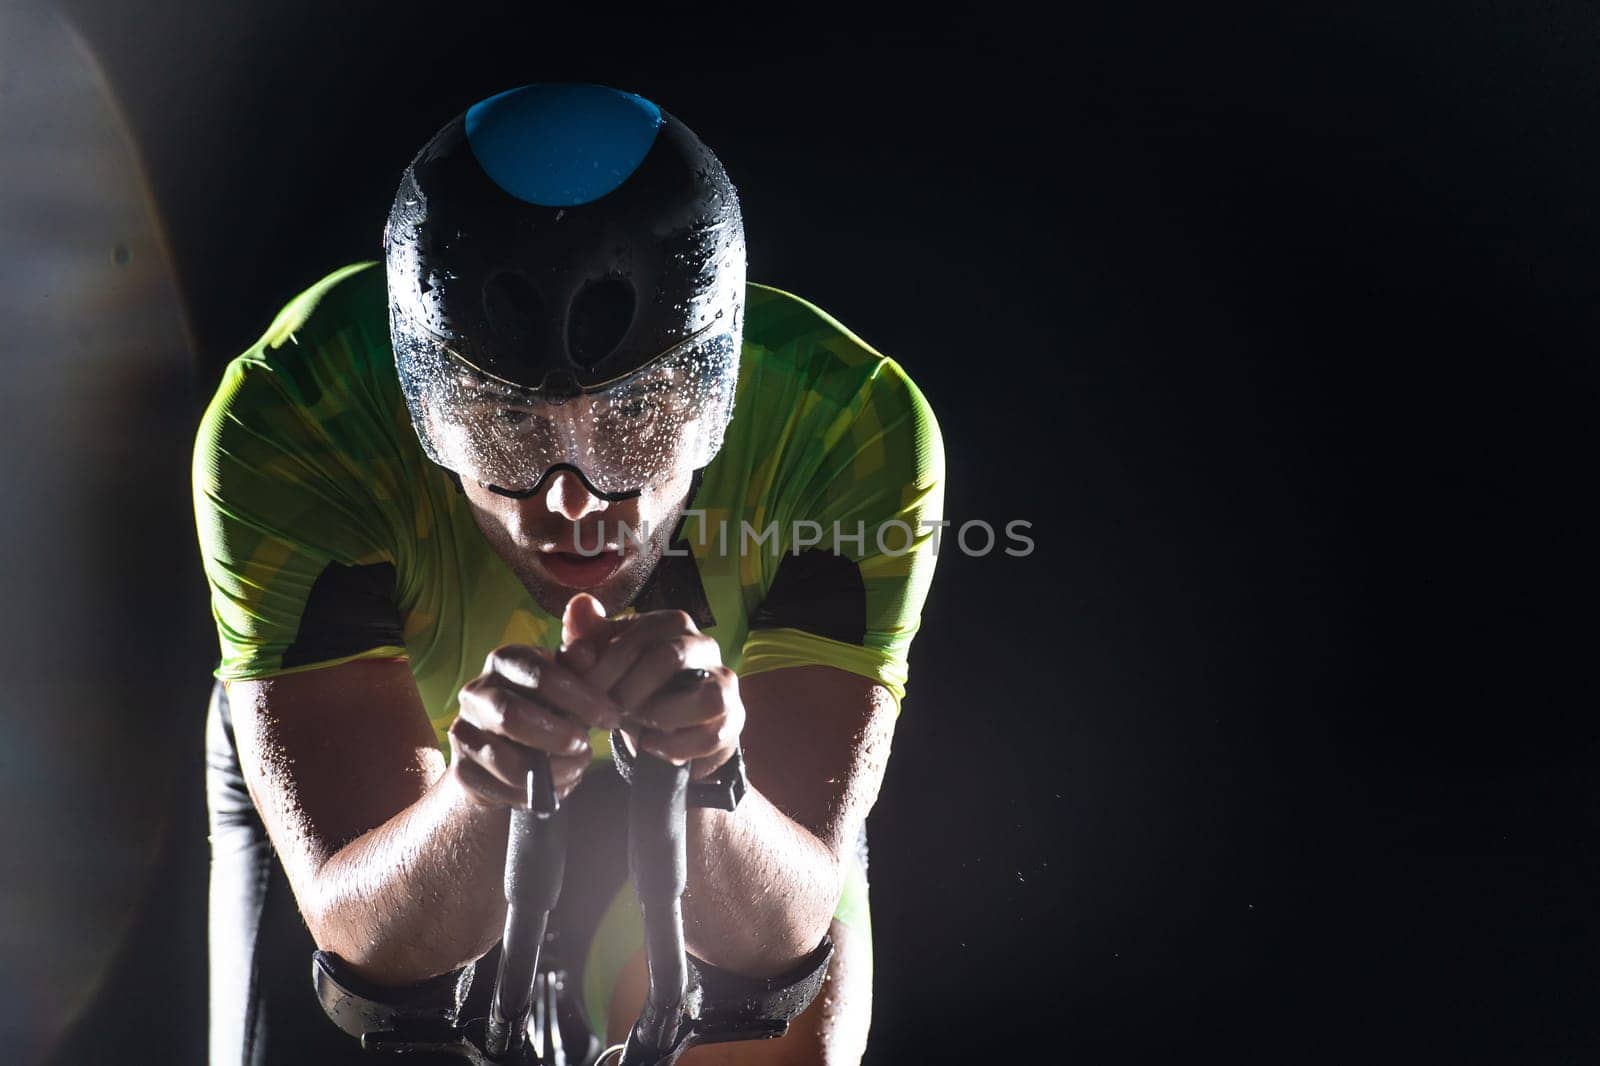 A triathlete rides his bike in the darkness of night, pushing himself to prepare for a marathon. The contrast between the darkness and the light of his bike creates a sense of drama and highlights the athlete's determination and perseverance